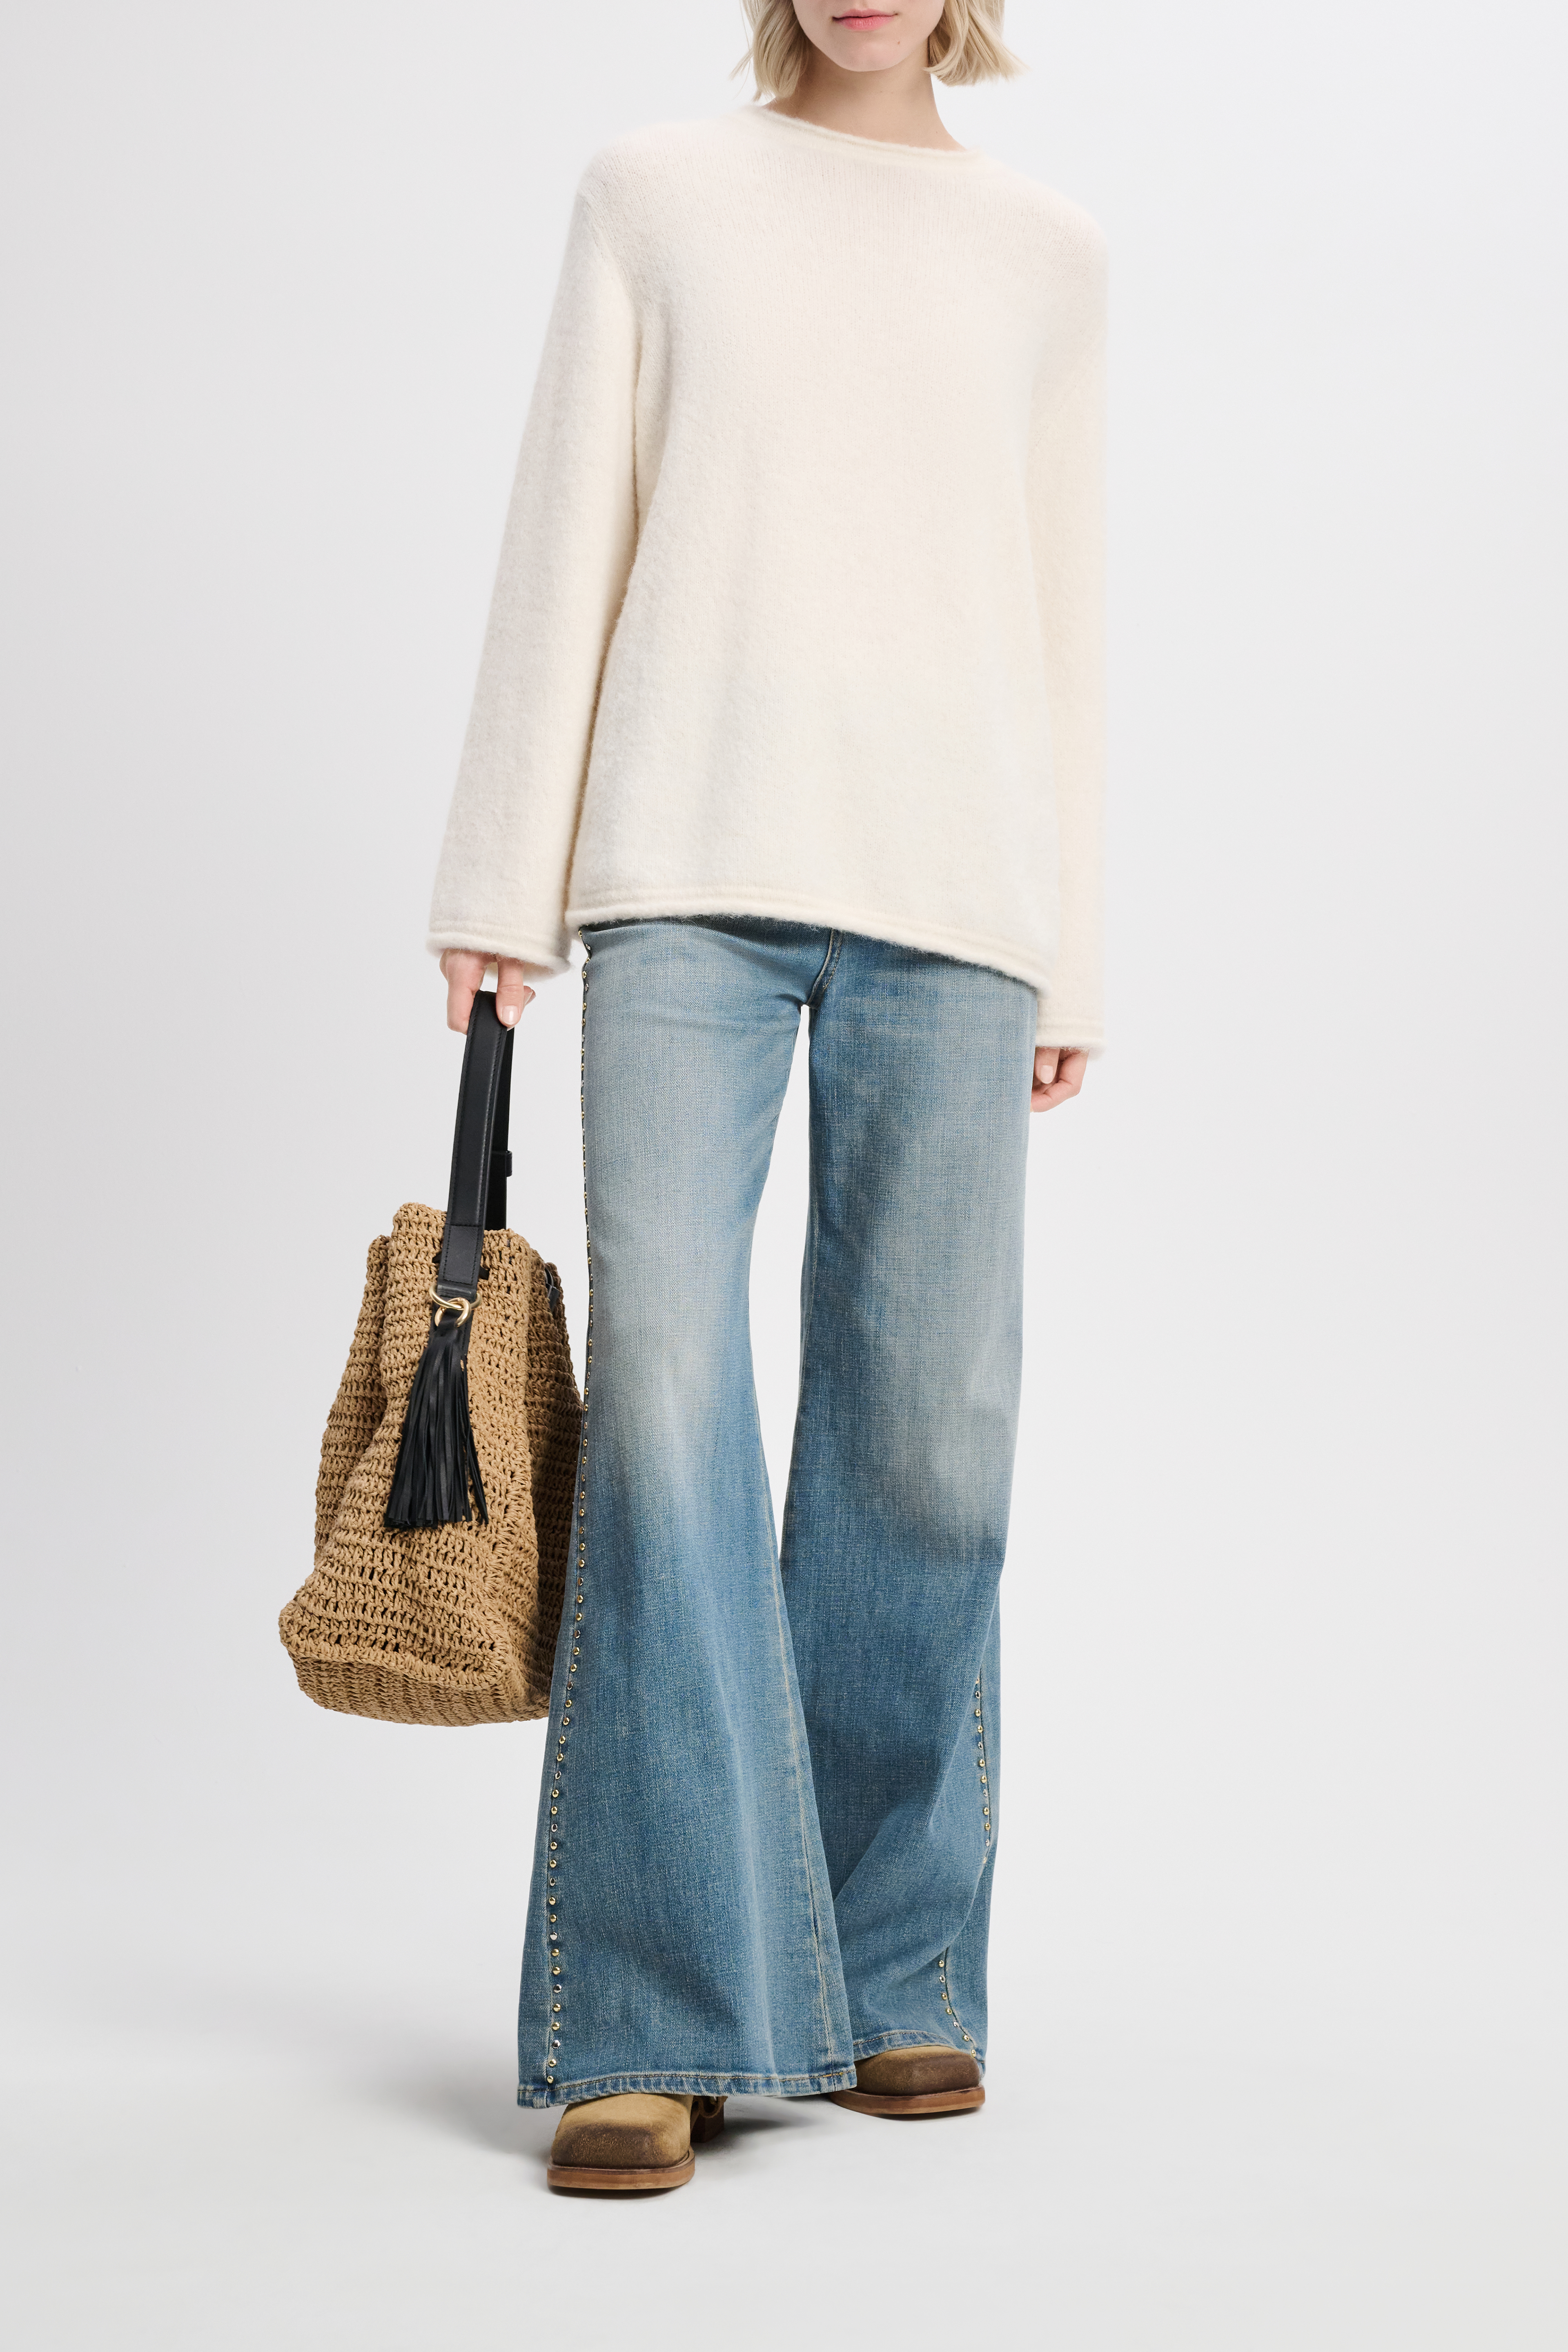 Dorothee Schumacher Alpaca mix knit pullover with rolled